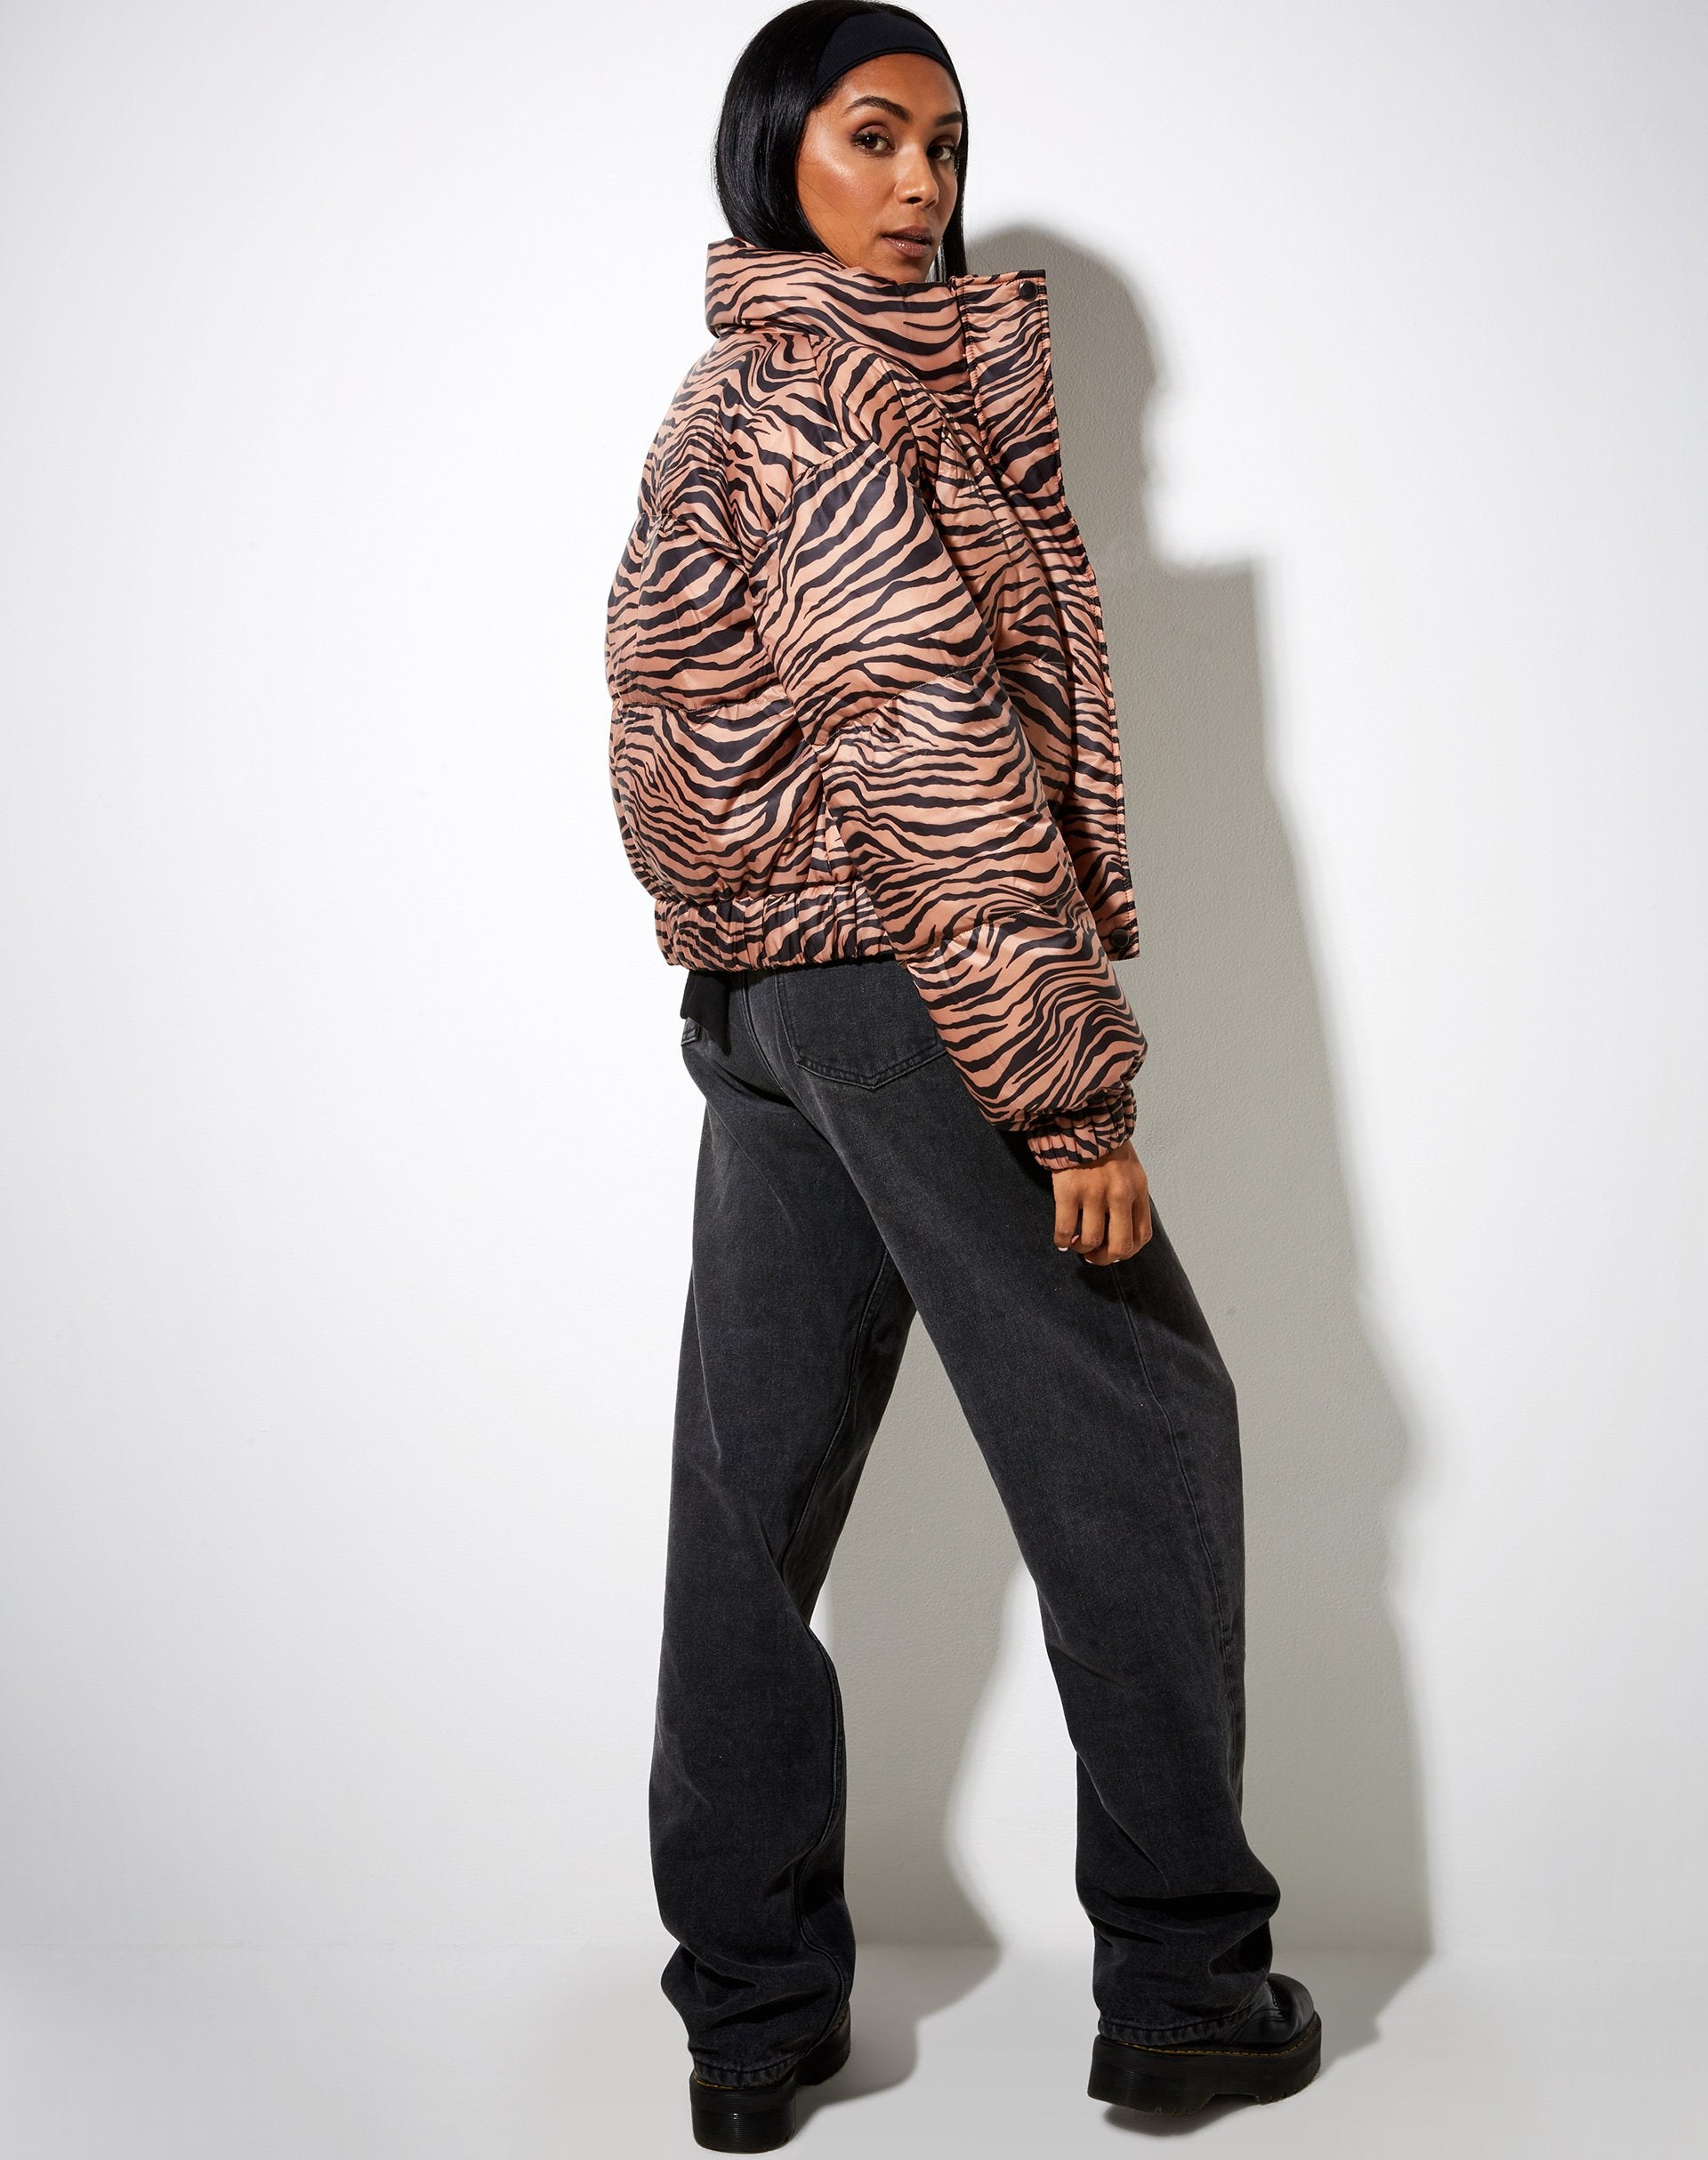 Image of Rohos Puffer Jacket in Zebra Black and Brown